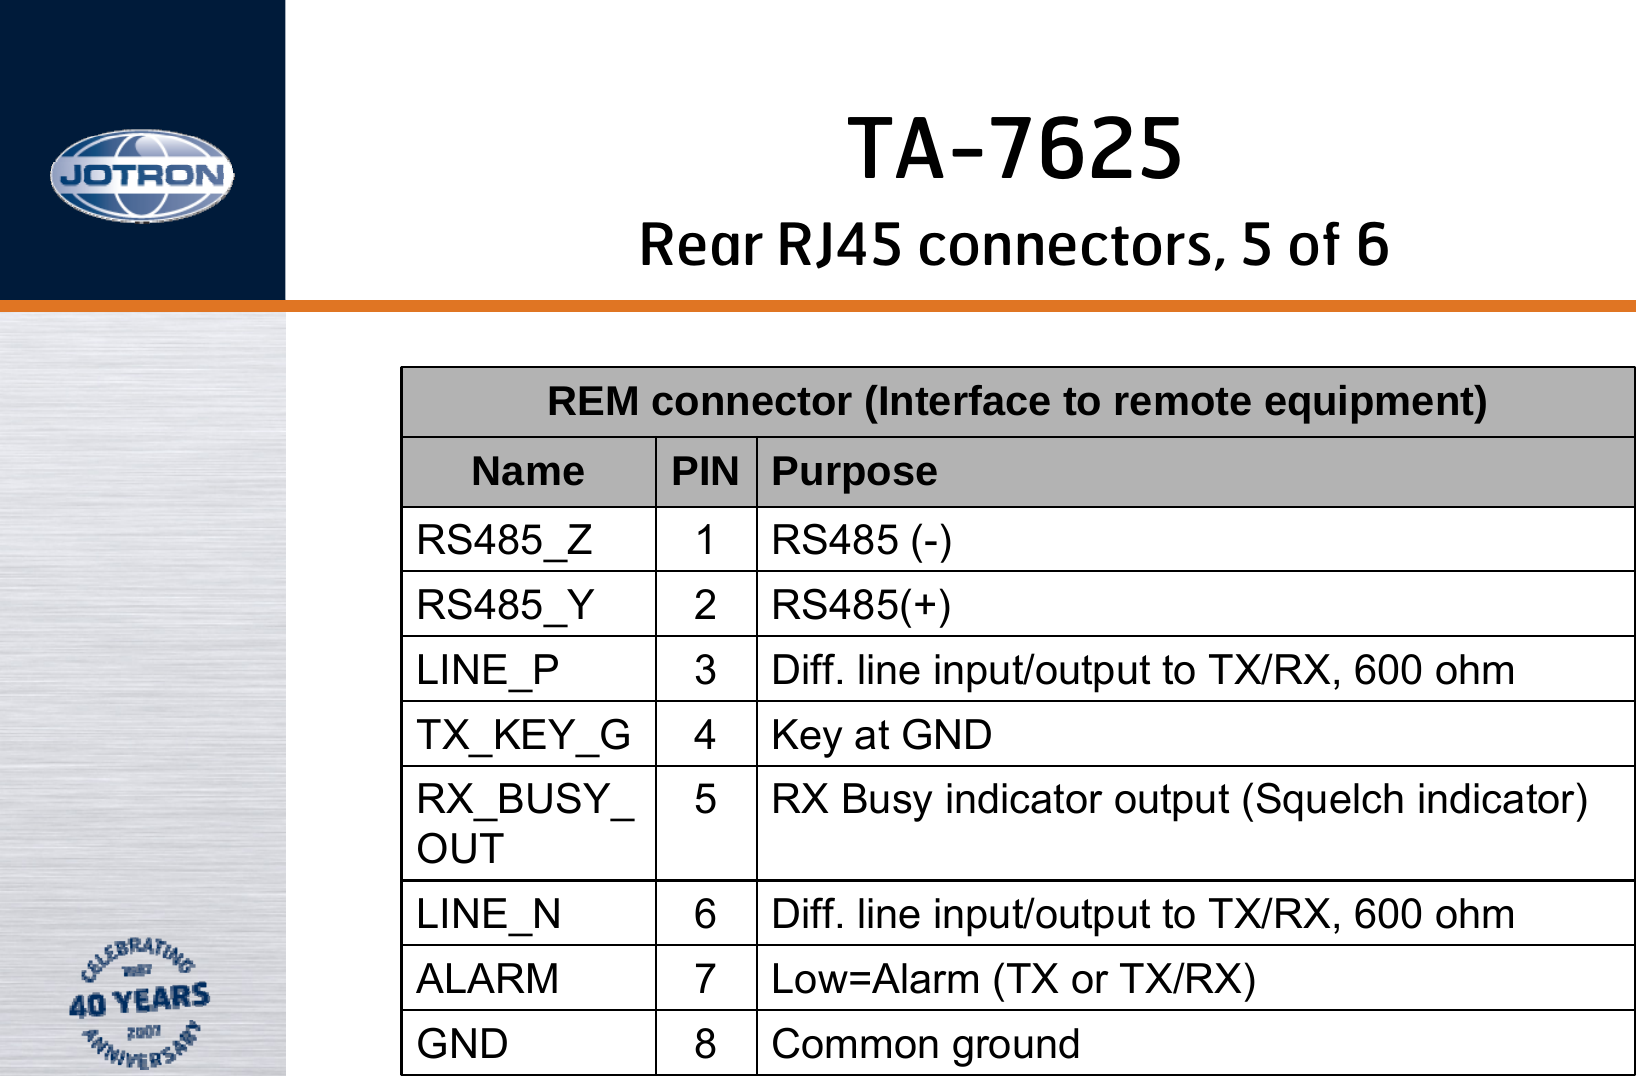 REM connector (Interface to remote equipment)Name PIN PurposeRS485_Z 1RS485 (-)RS485_Y 2RS485(+)LINE_P 3Diff. line input/output to TX/RX, 600 ohmTX_KEY_G 4Key at GNDRX_BUSY_OUT5RX Busy indicator output (Squelch indicator)LINE_N 6Diff. line input/output to TX/RX, 600 ohmALARM 7Low=Alarm (TX or TX/RX)GND 8Common ground Rear RJ45 connectors, 5 of 6TA-7625